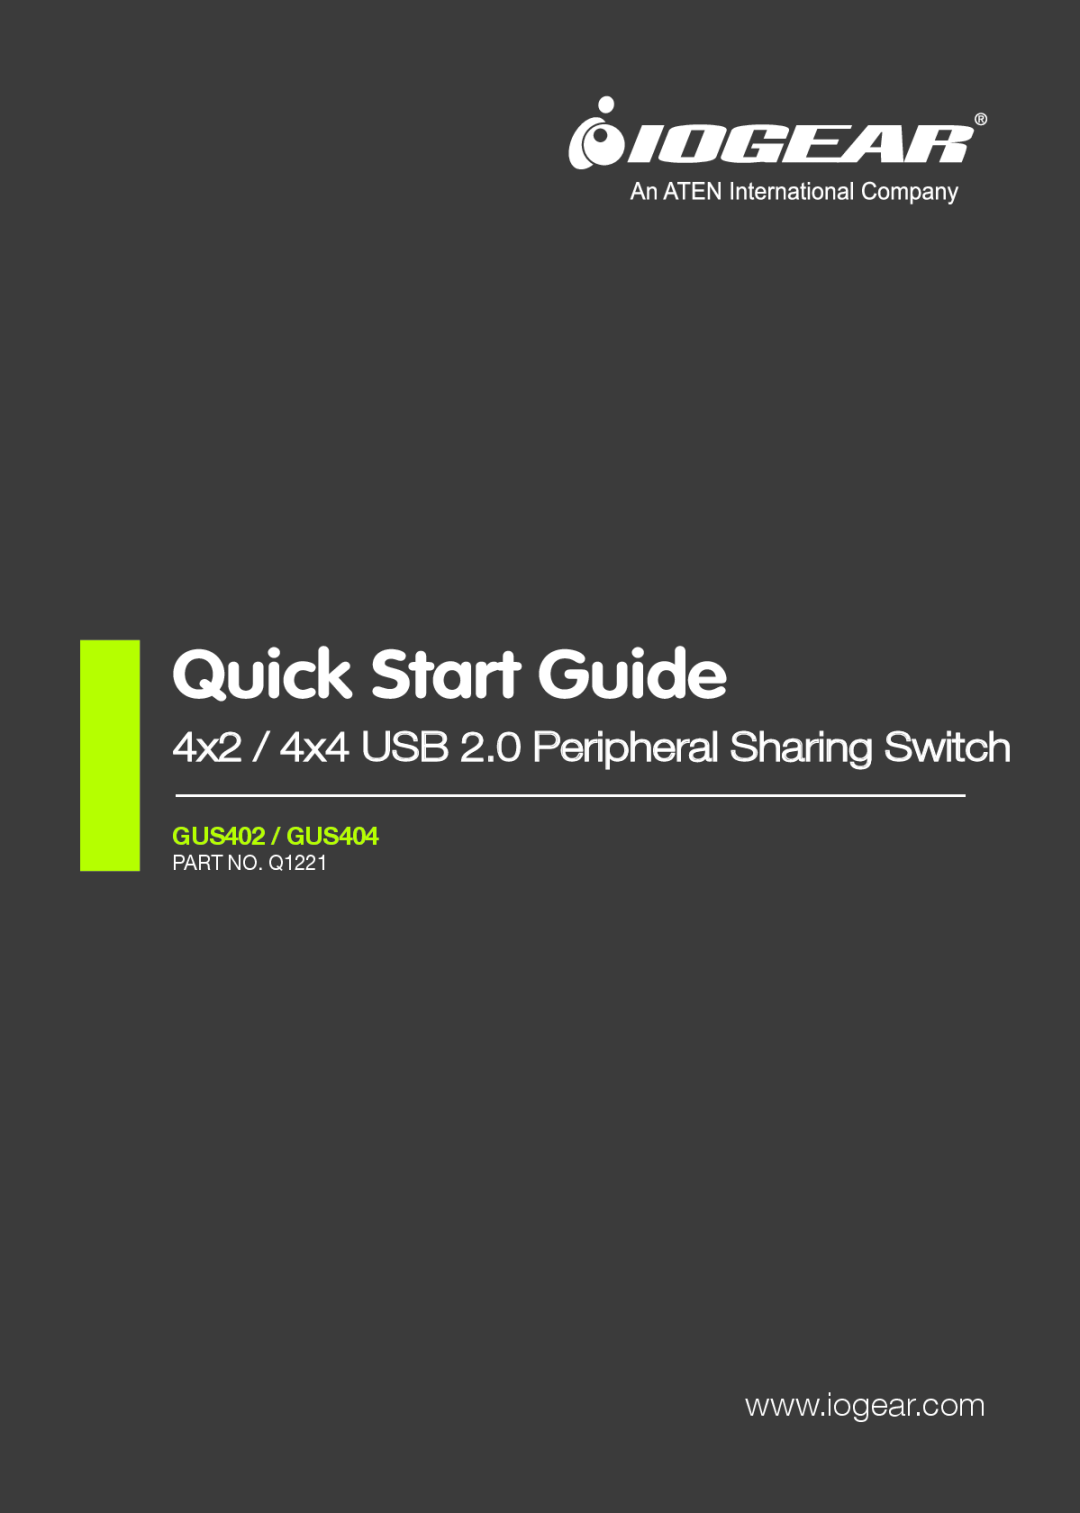 IOGear GUS402 / GUS404 quick start Quick Start Guide, 4x2 / 4x4 USB 2.0 Peripheral Sharing Switch, PART NO. Q1221 